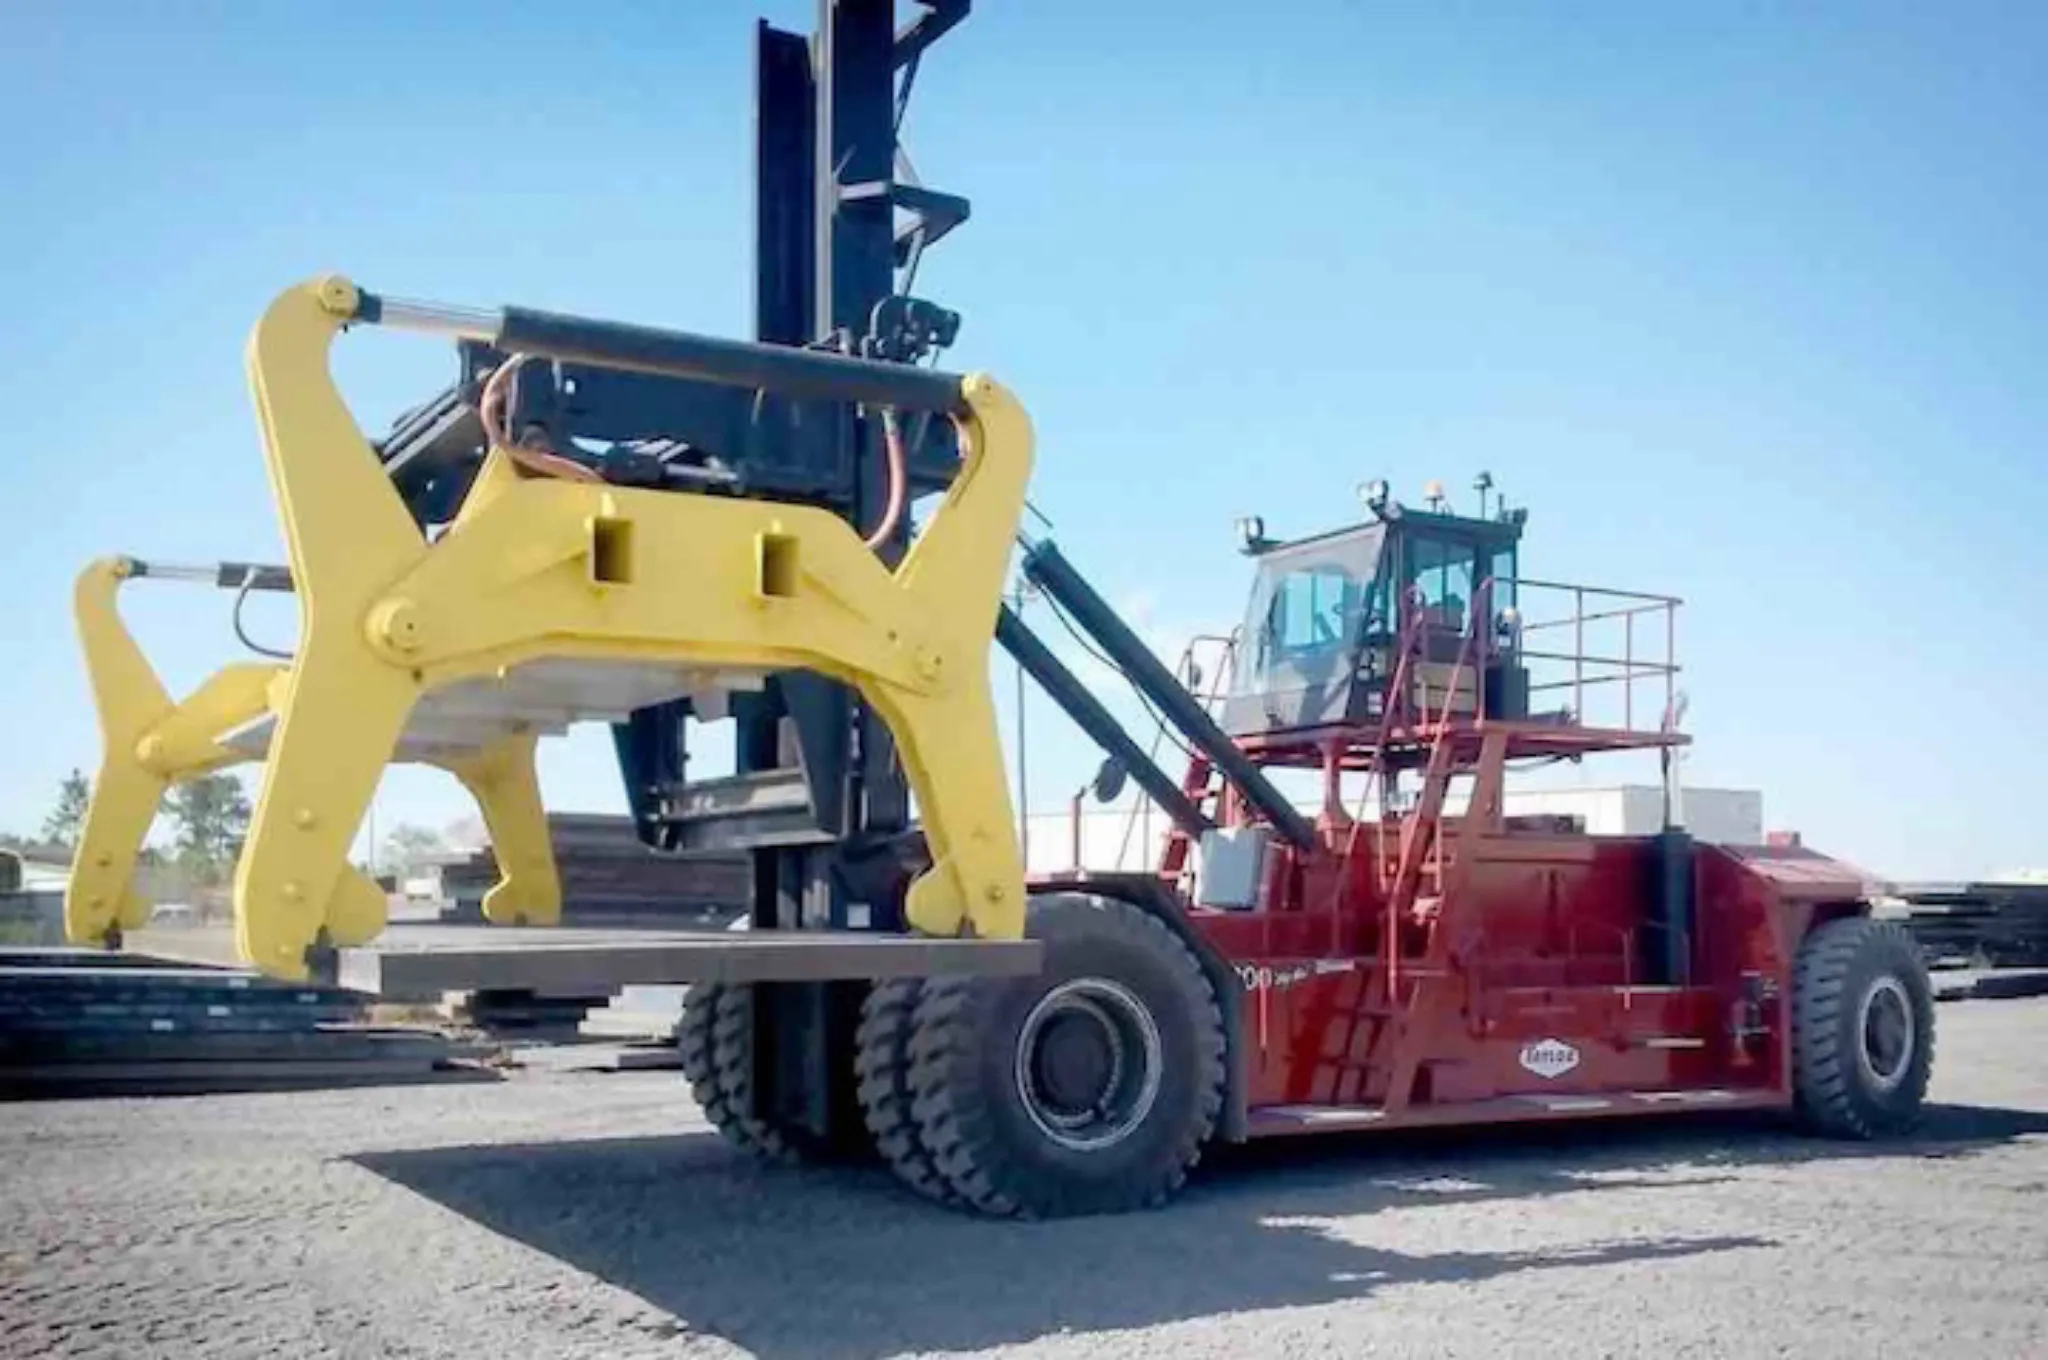 Taylor X-1100 High Capacity Forklift